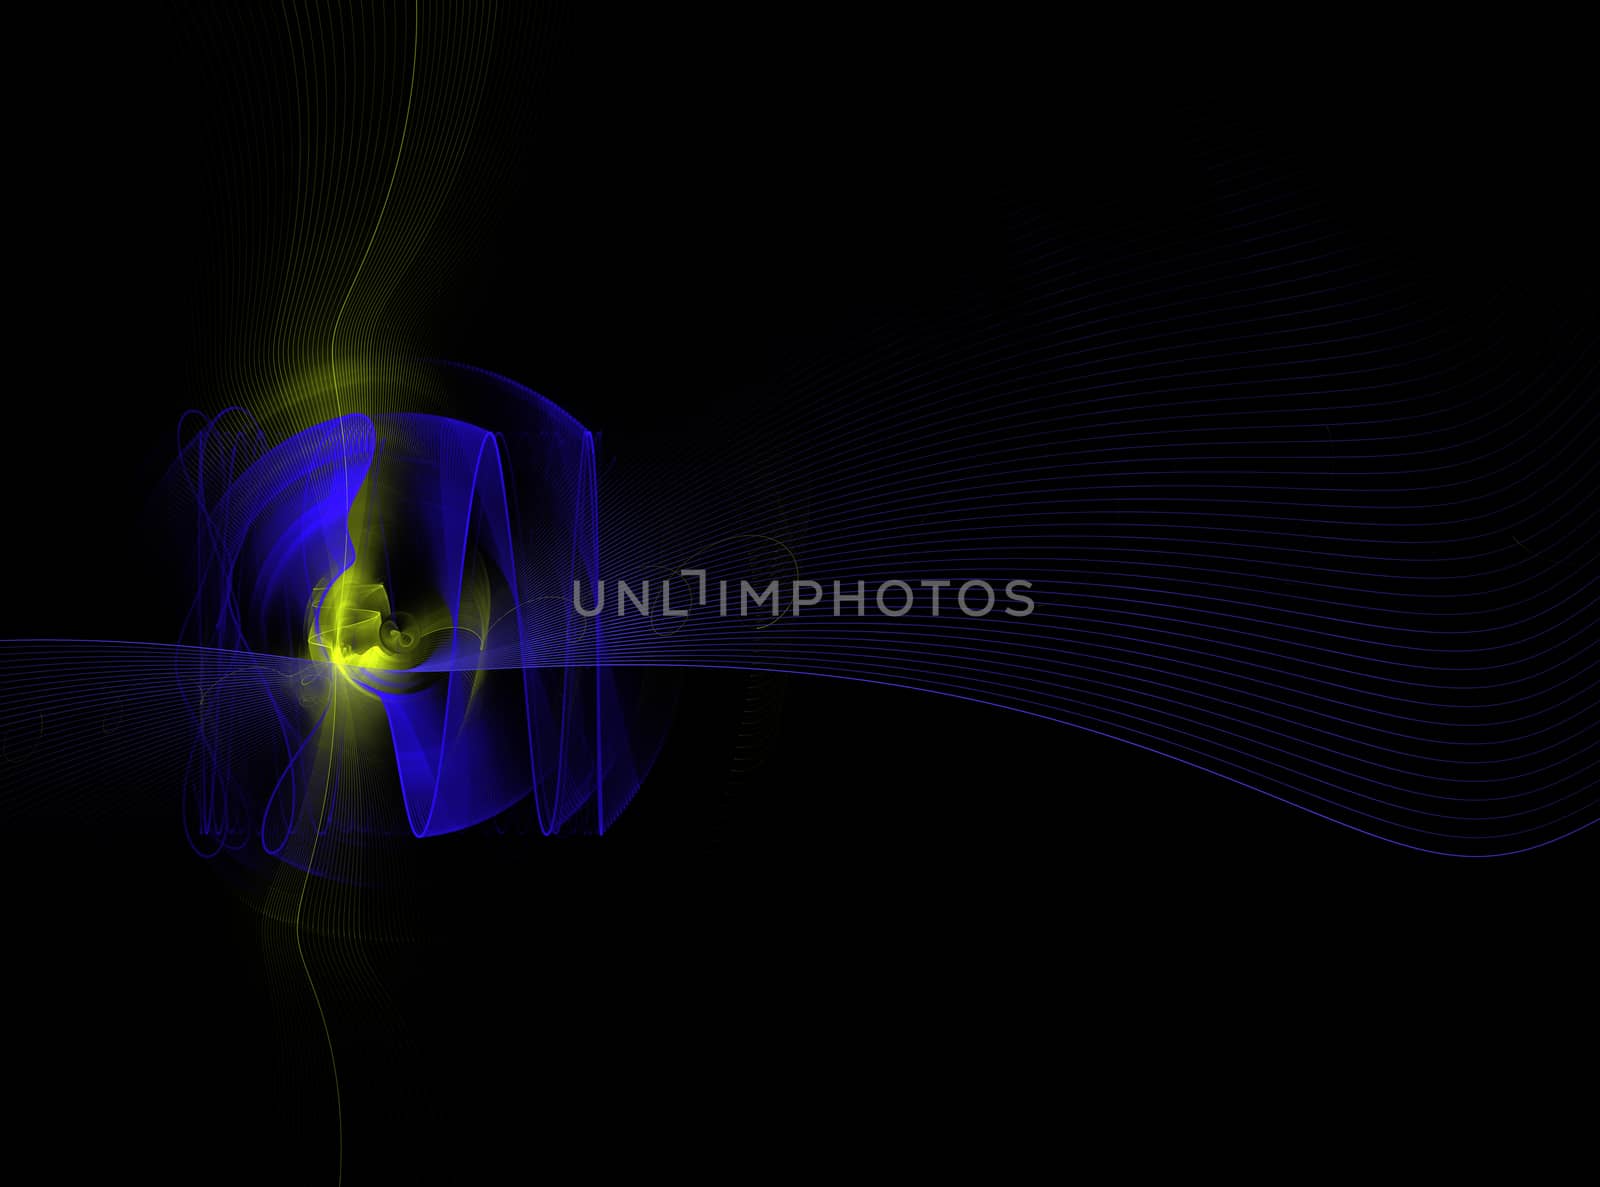 An abstract computer generated modern fractal design on dark background. Abstract fractal color texture. Digital art. Abstract Form & Colors. The propagation of sound waves. Scientific pattern